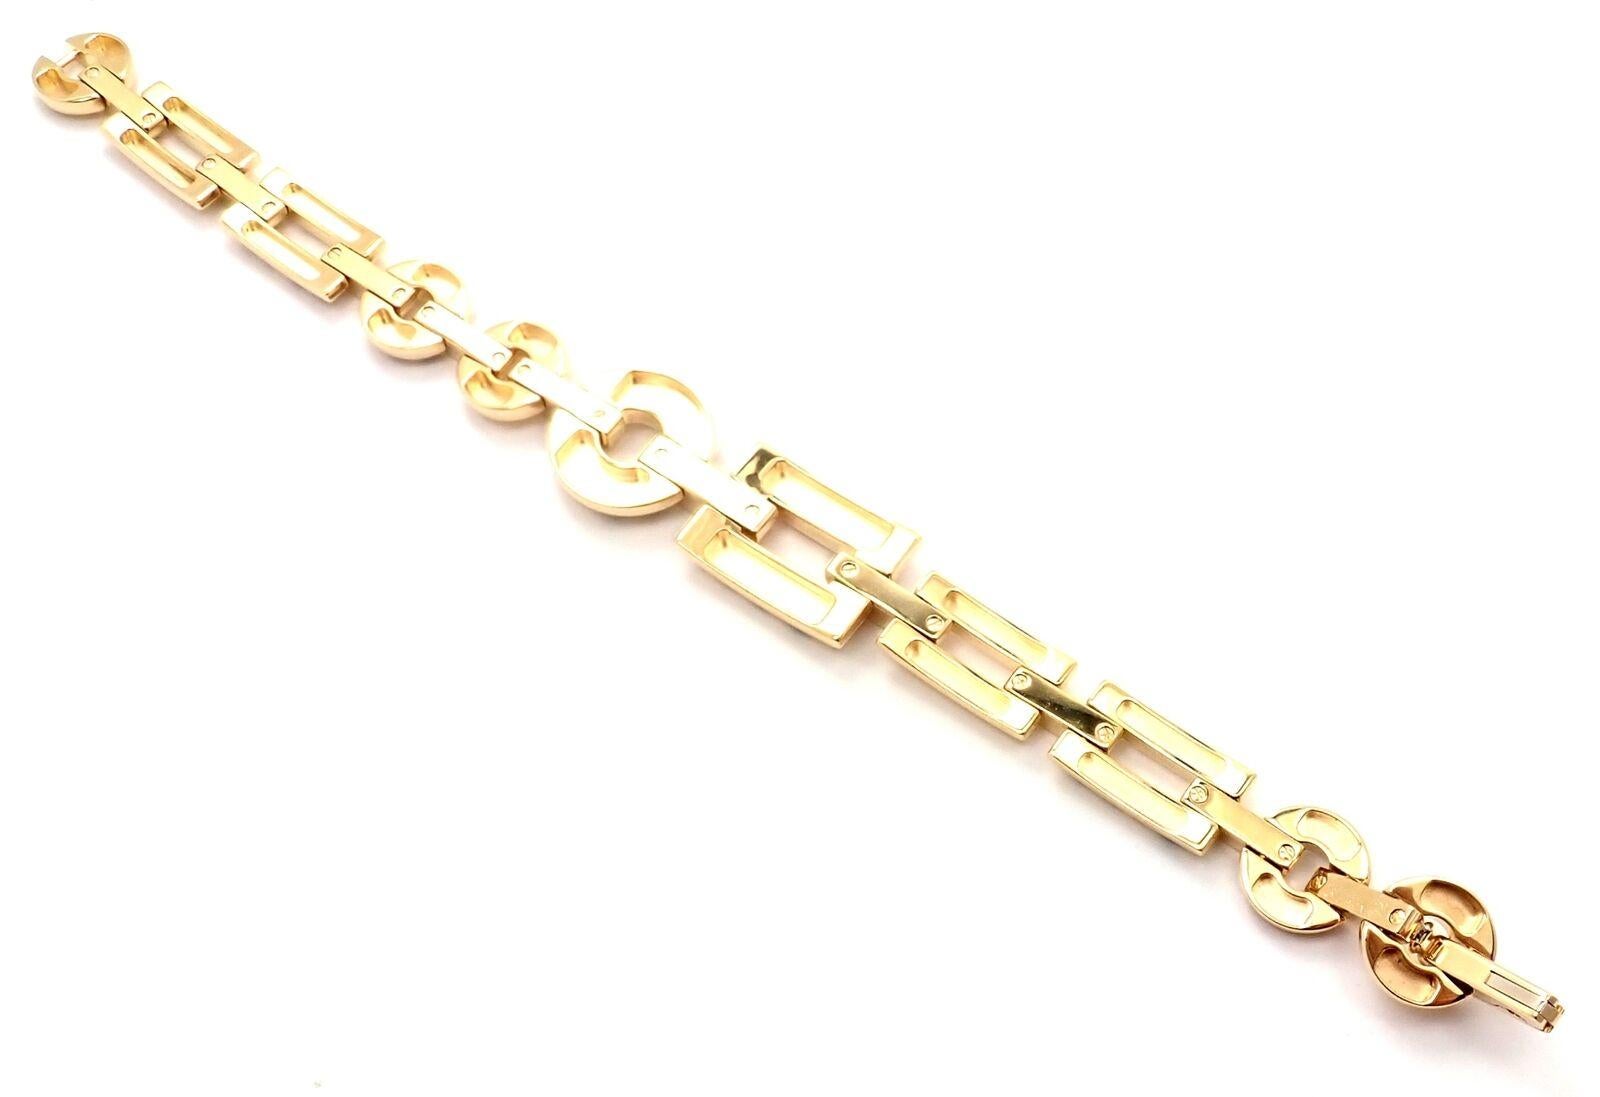 Cartier Panthere Panther Black Lacquer Spot Yellow Gold Link Bracelet In Excellent Condition For Sale In Holland, PA